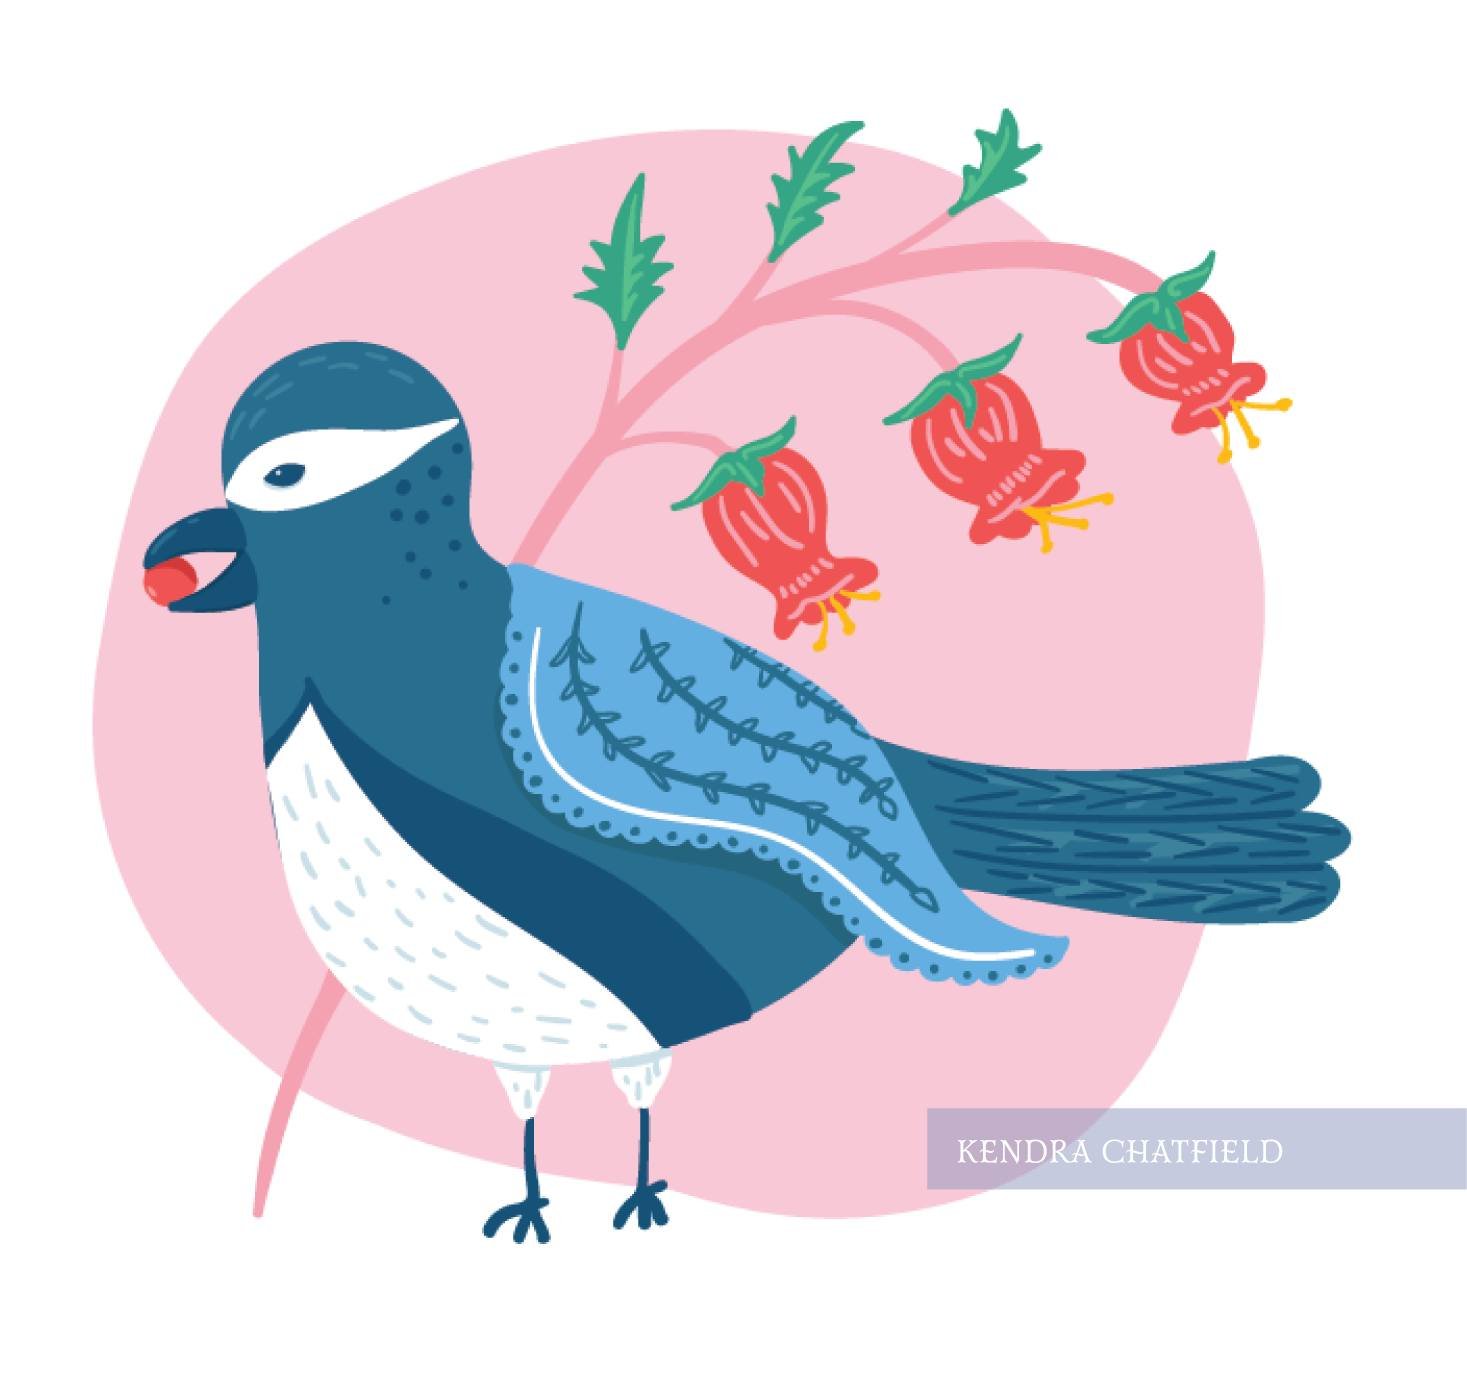 Fun little bird drawing from my &quot;Things are Looking Up&quot; collection

#bird #birdart #illustration #vectorart #womeninillustration #surfacedesign #artlicensing #atforsale #licensingartist #drawing #folkart